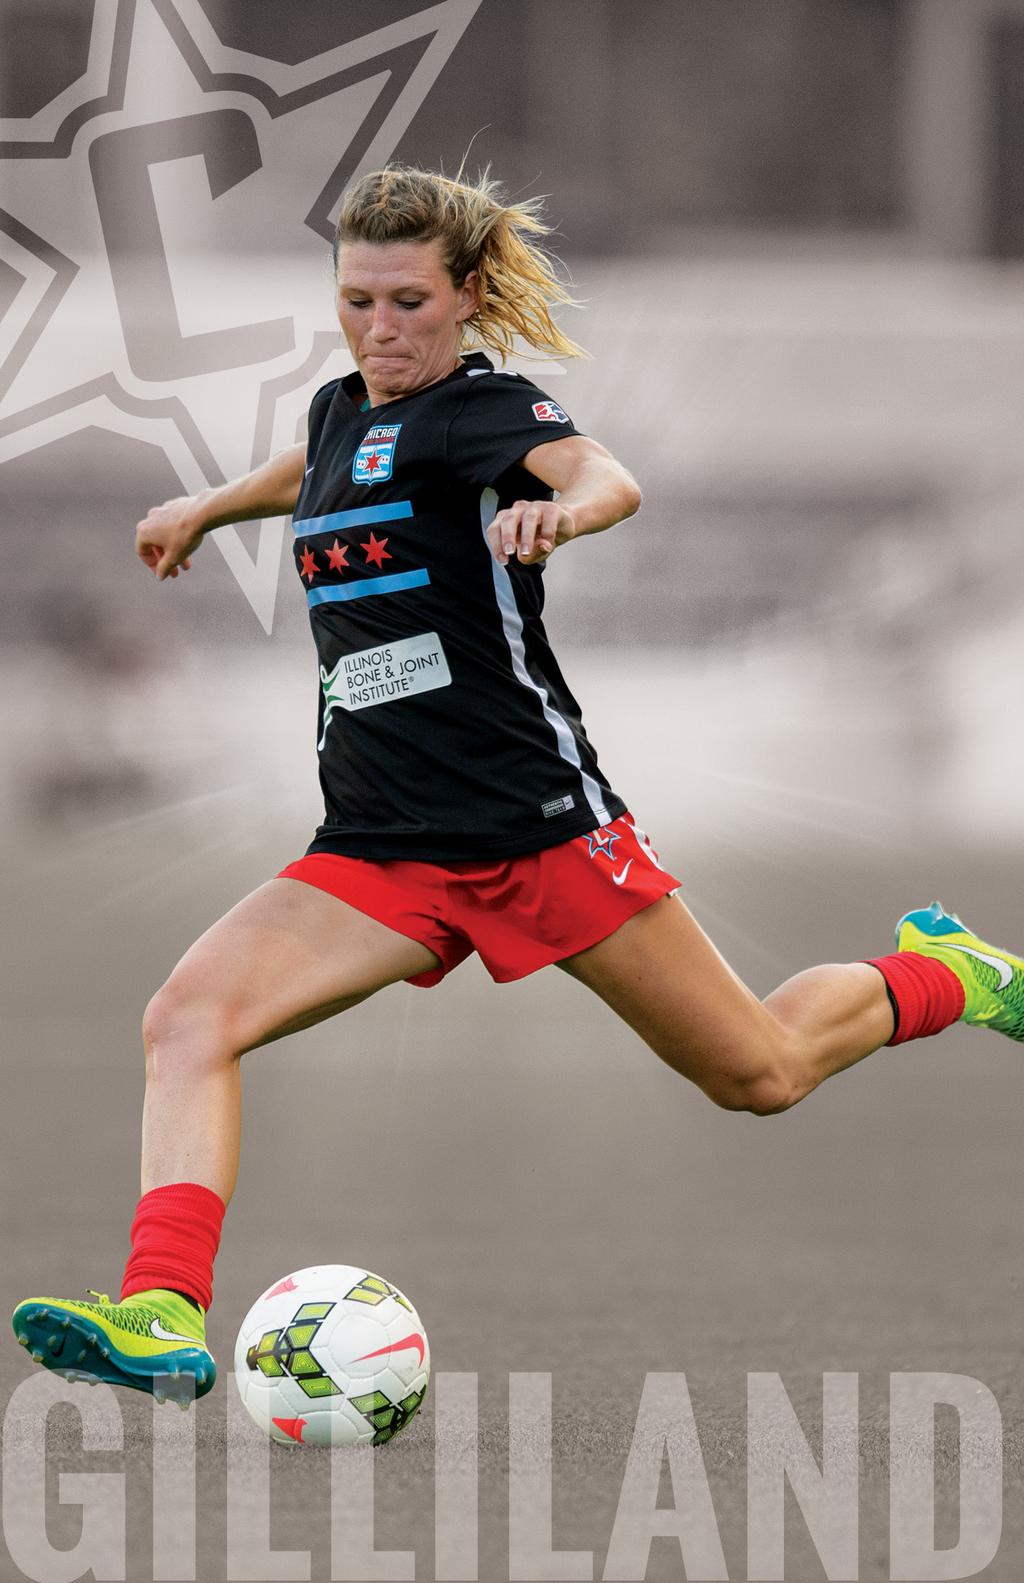 PROFESSIONAL: 2015: Was the 8th overall selection by the Red Stars in the NWSL College Draft Played in 19 matches, starting 17 Recorded 2 assists 1533 minutes of play (3rd highest minutes on team)